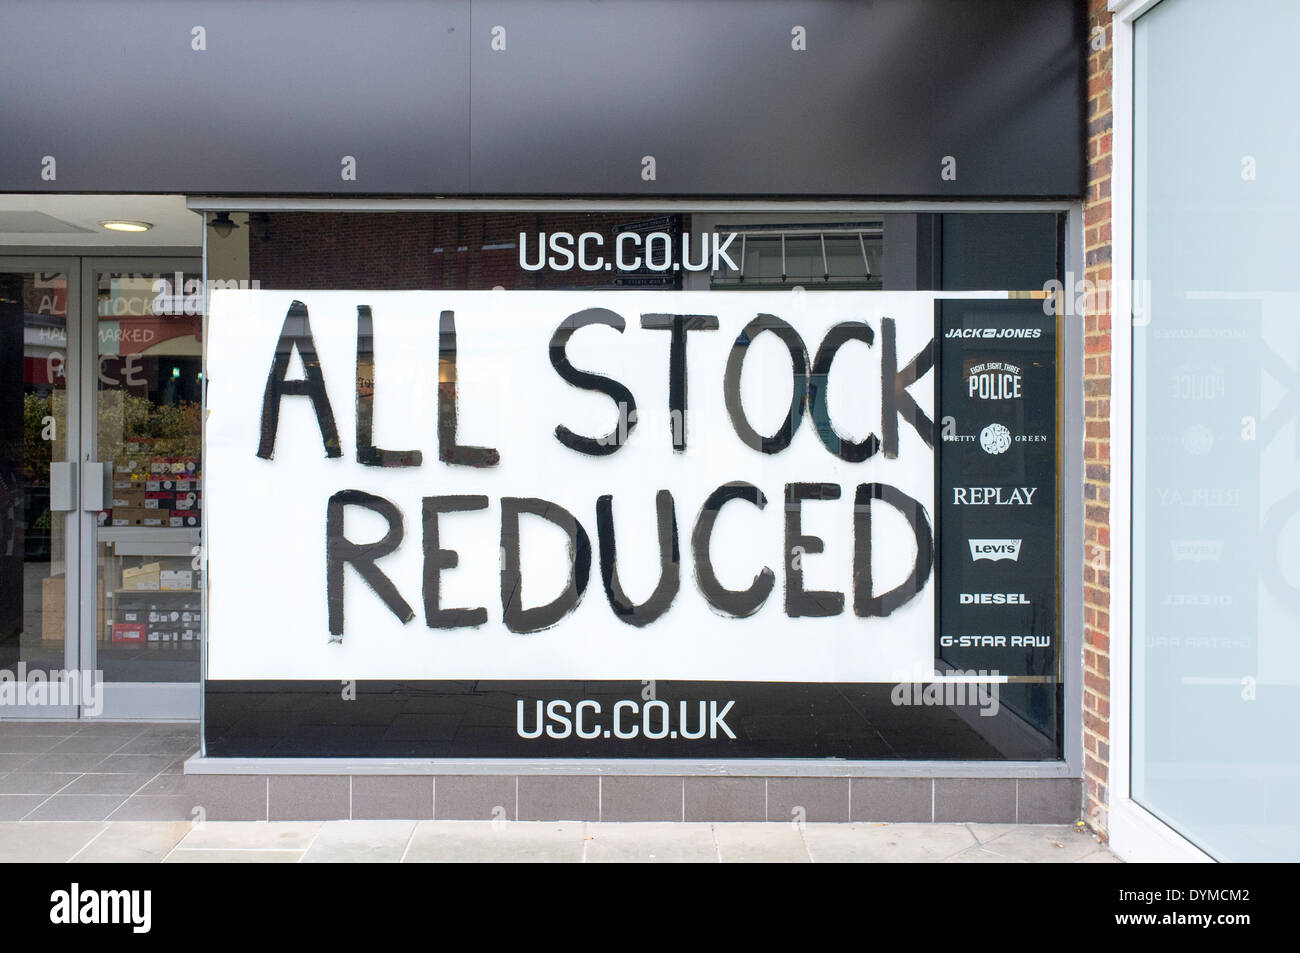 USC fashion store closing down all stock reduced clearance sale Stock Photo  - Alamy